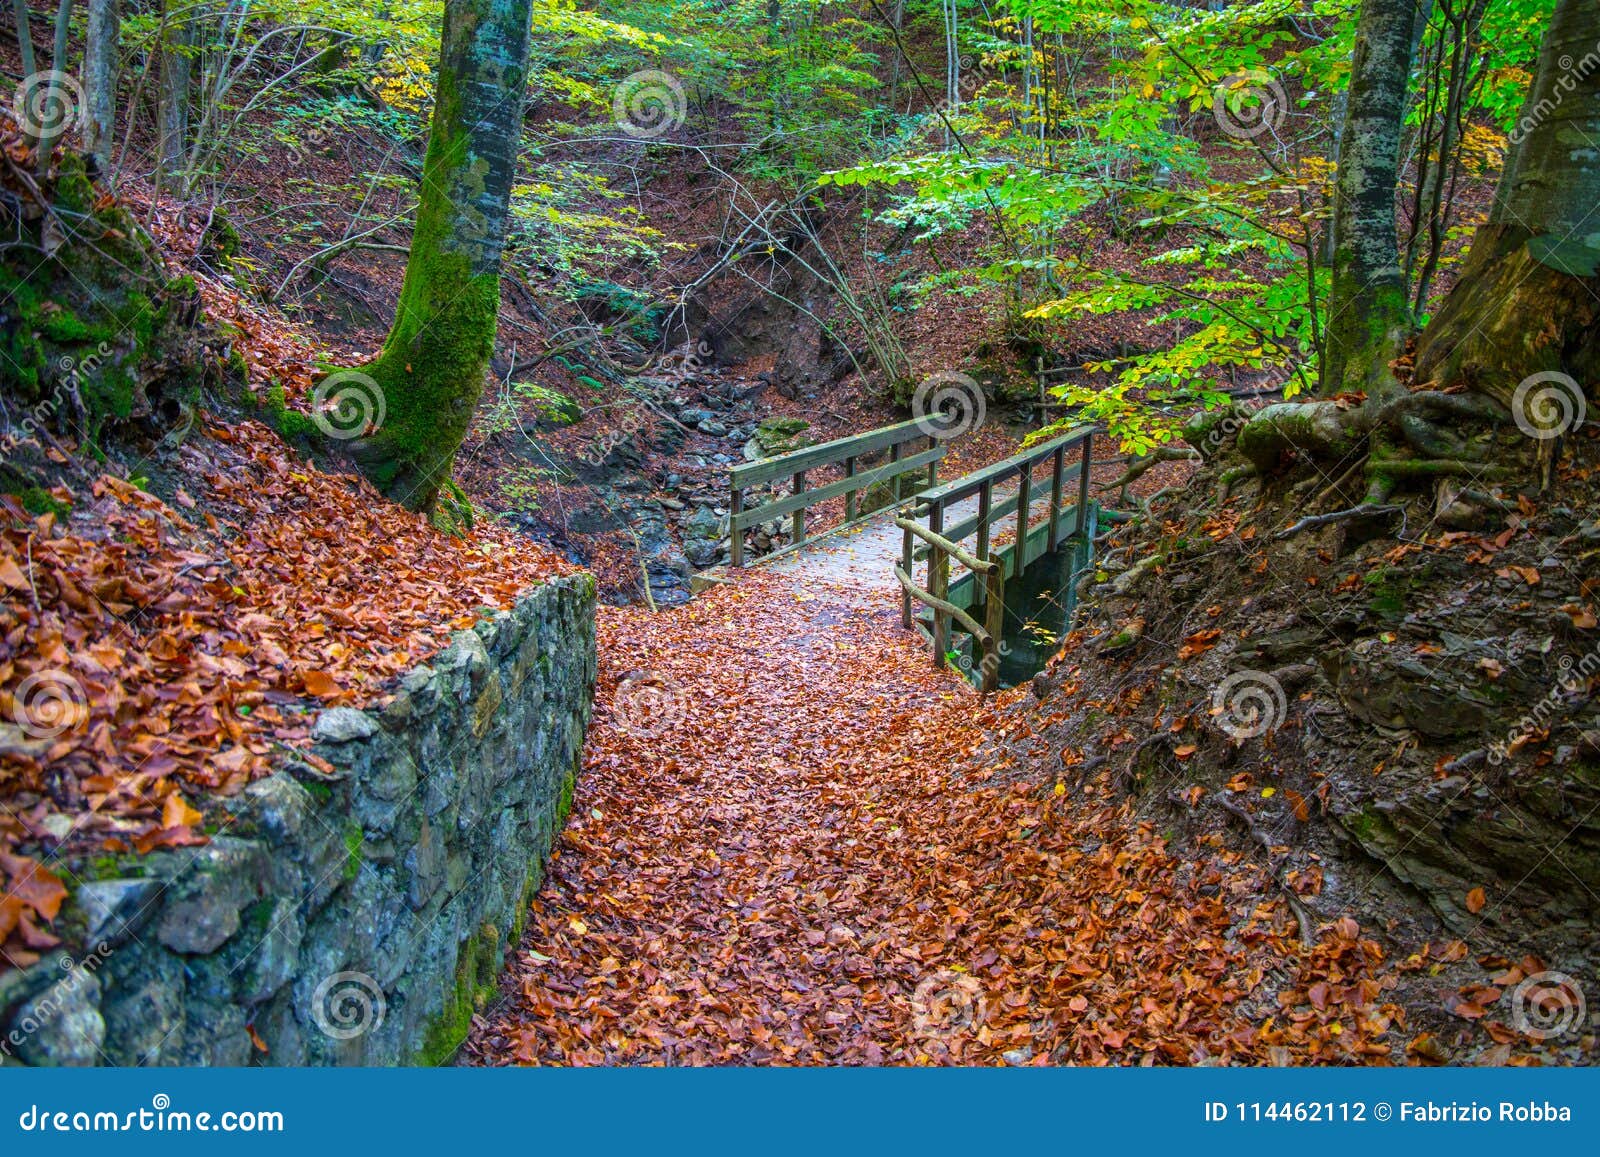 autumn forest with wood bridge over creek in beeches forest, italy